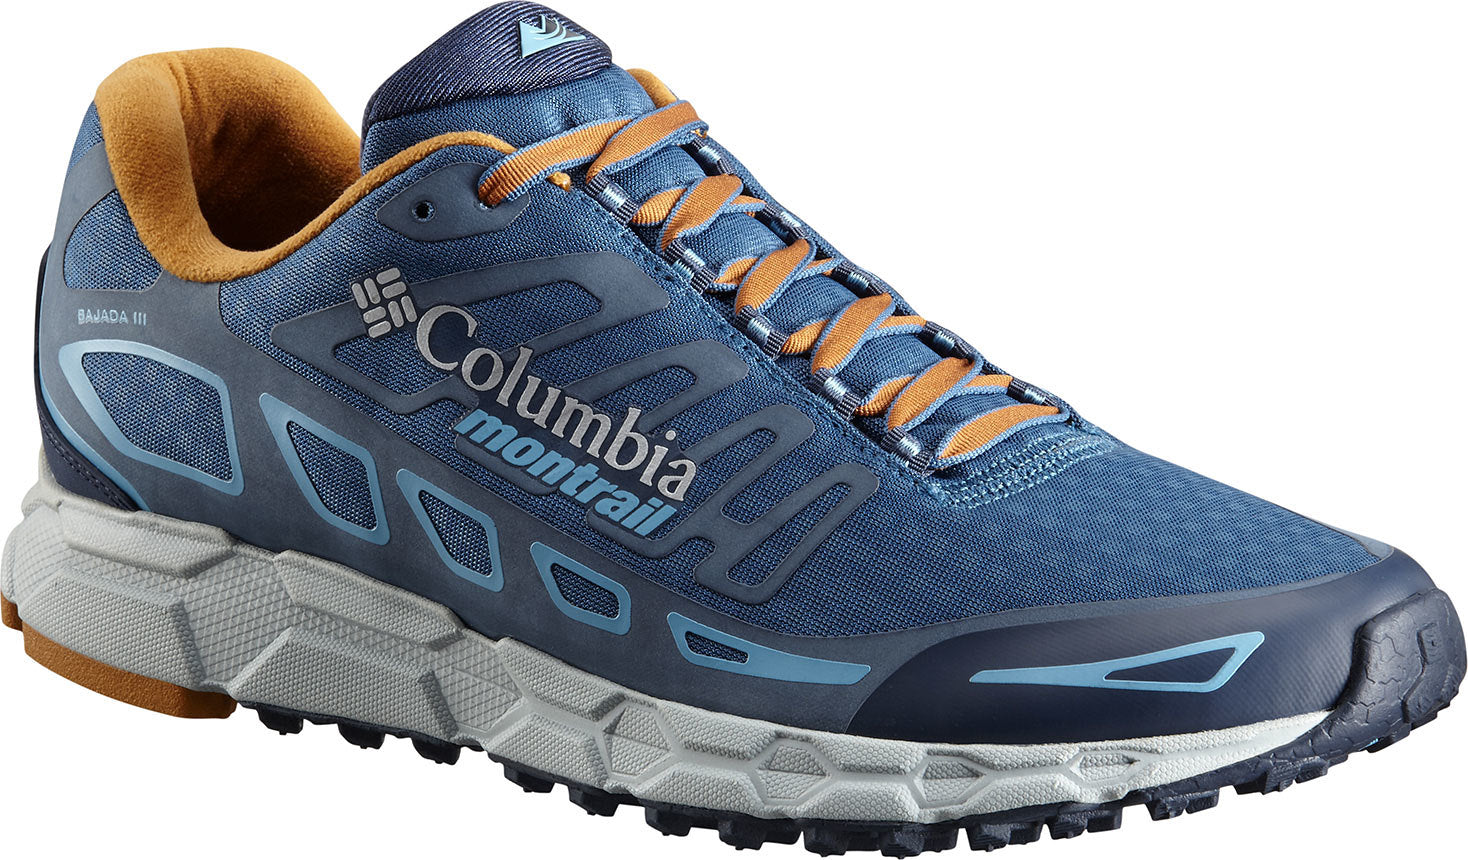 56 Casual Columbia shoes true to size for Mens